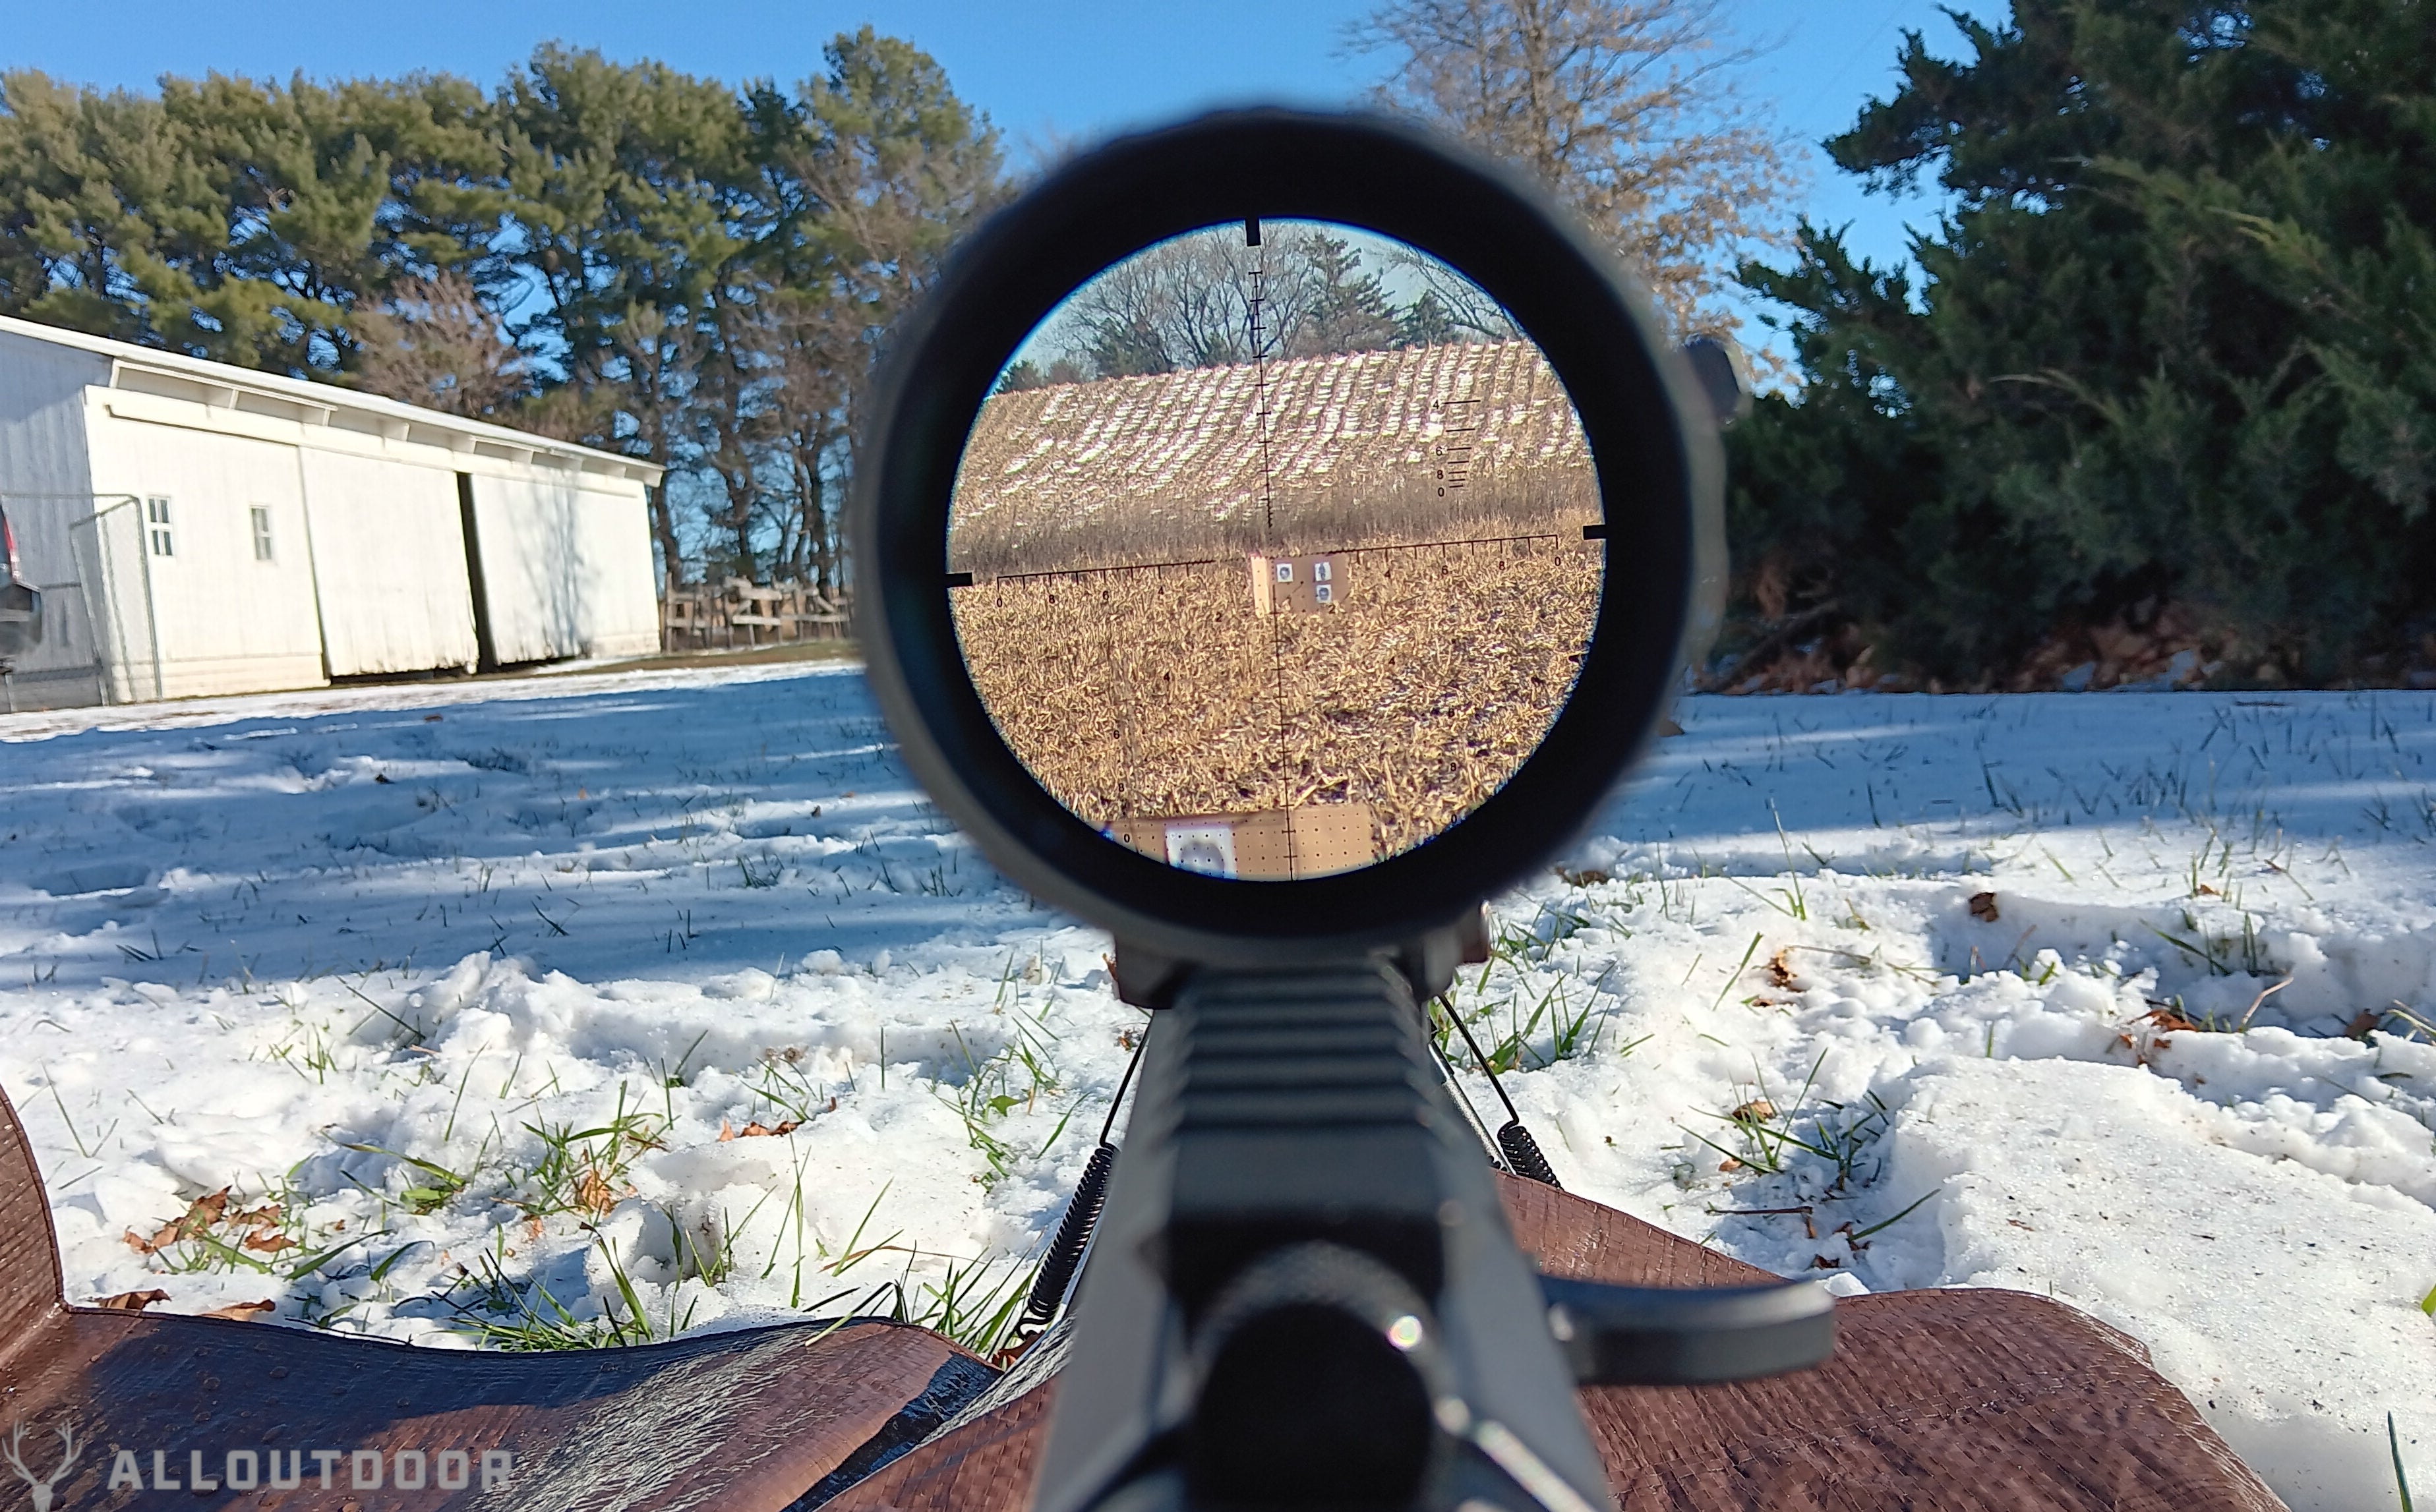 Primary Arms GLx 3-18x44mm Scope Review